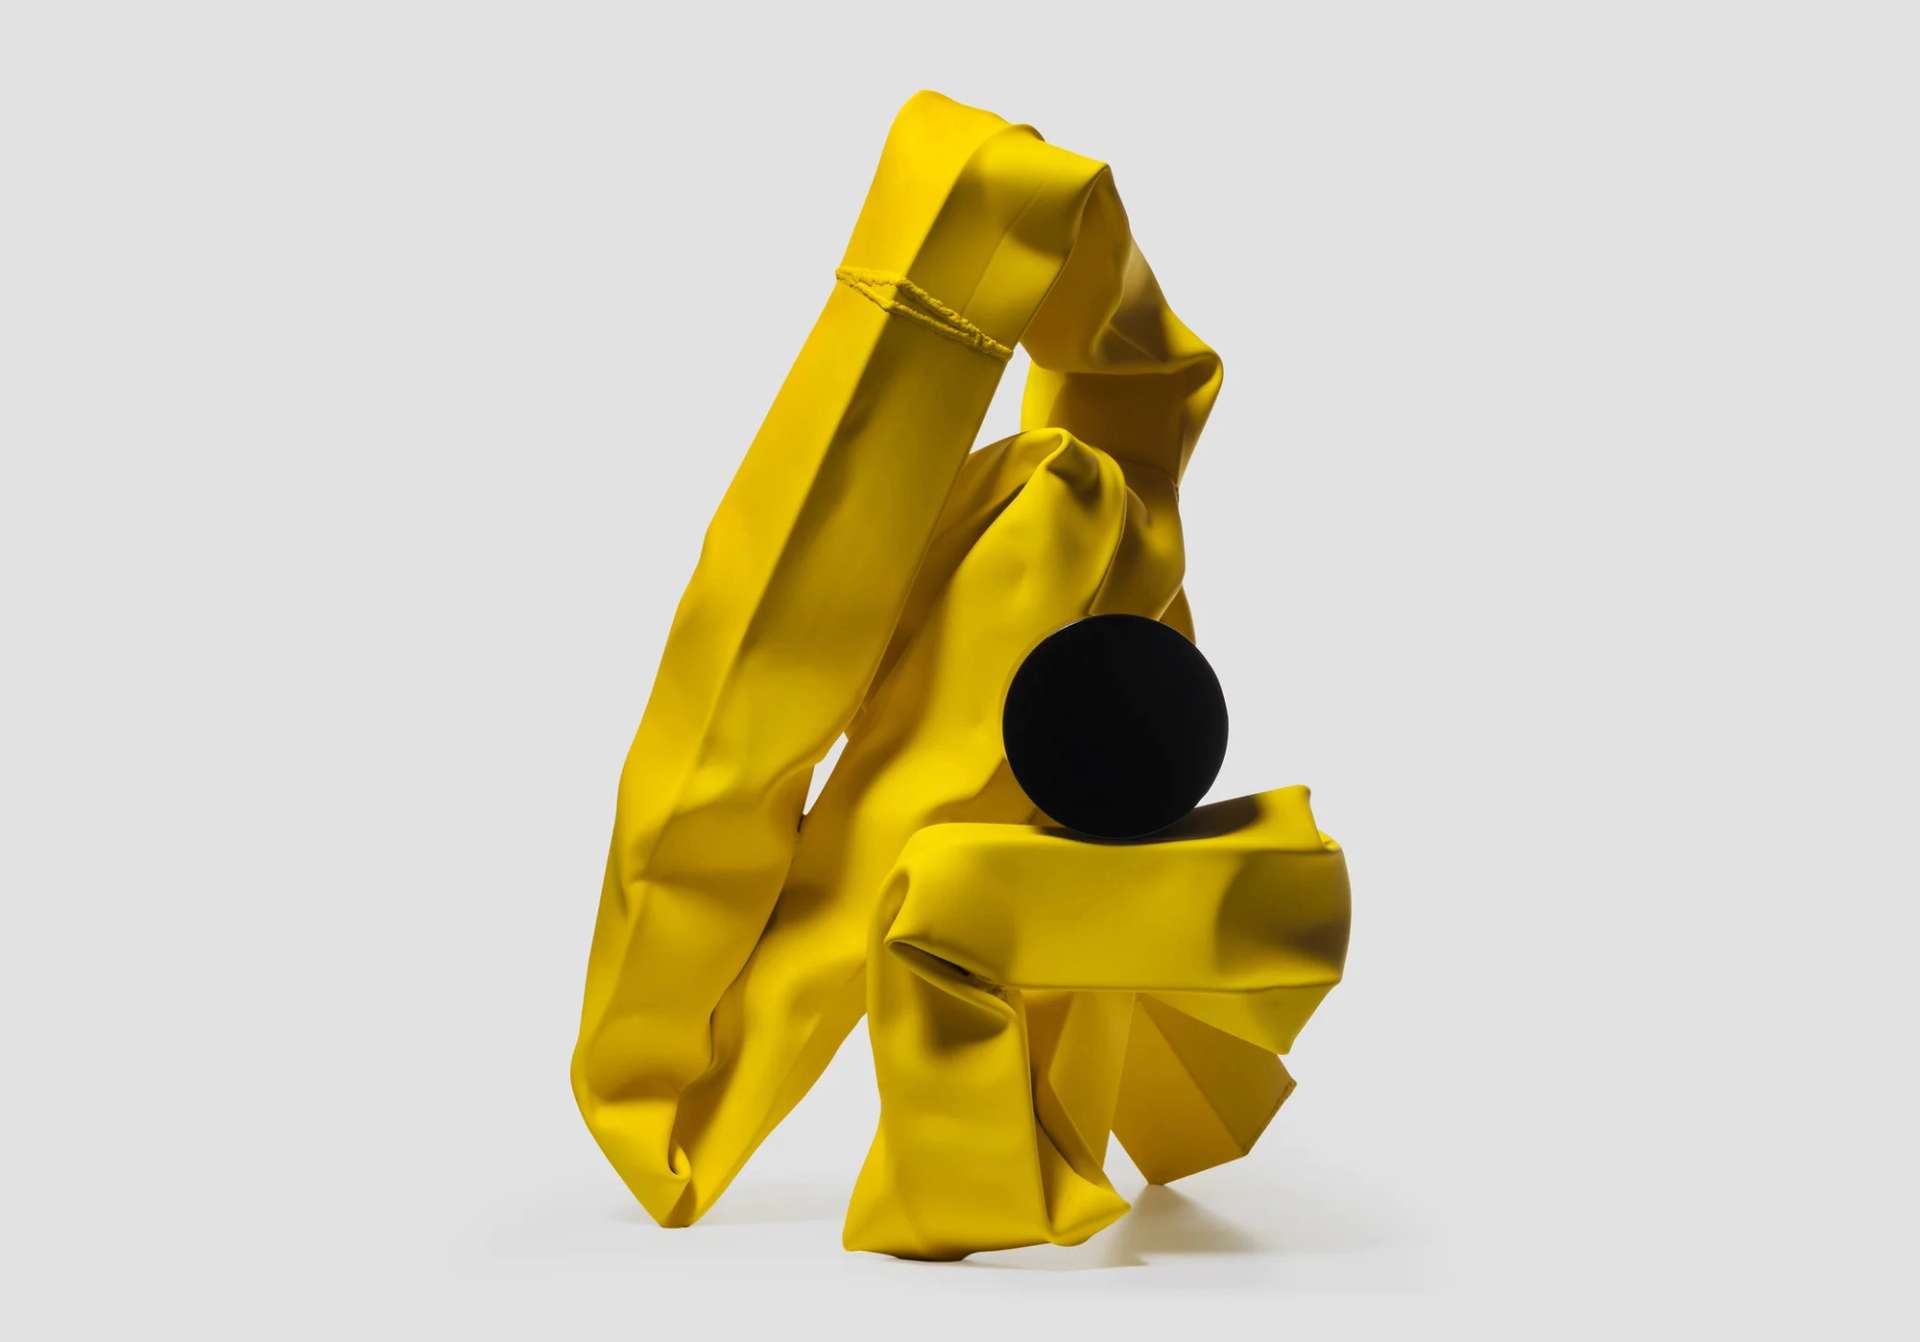 Twisted yellow sculpture with a black ball in the centre